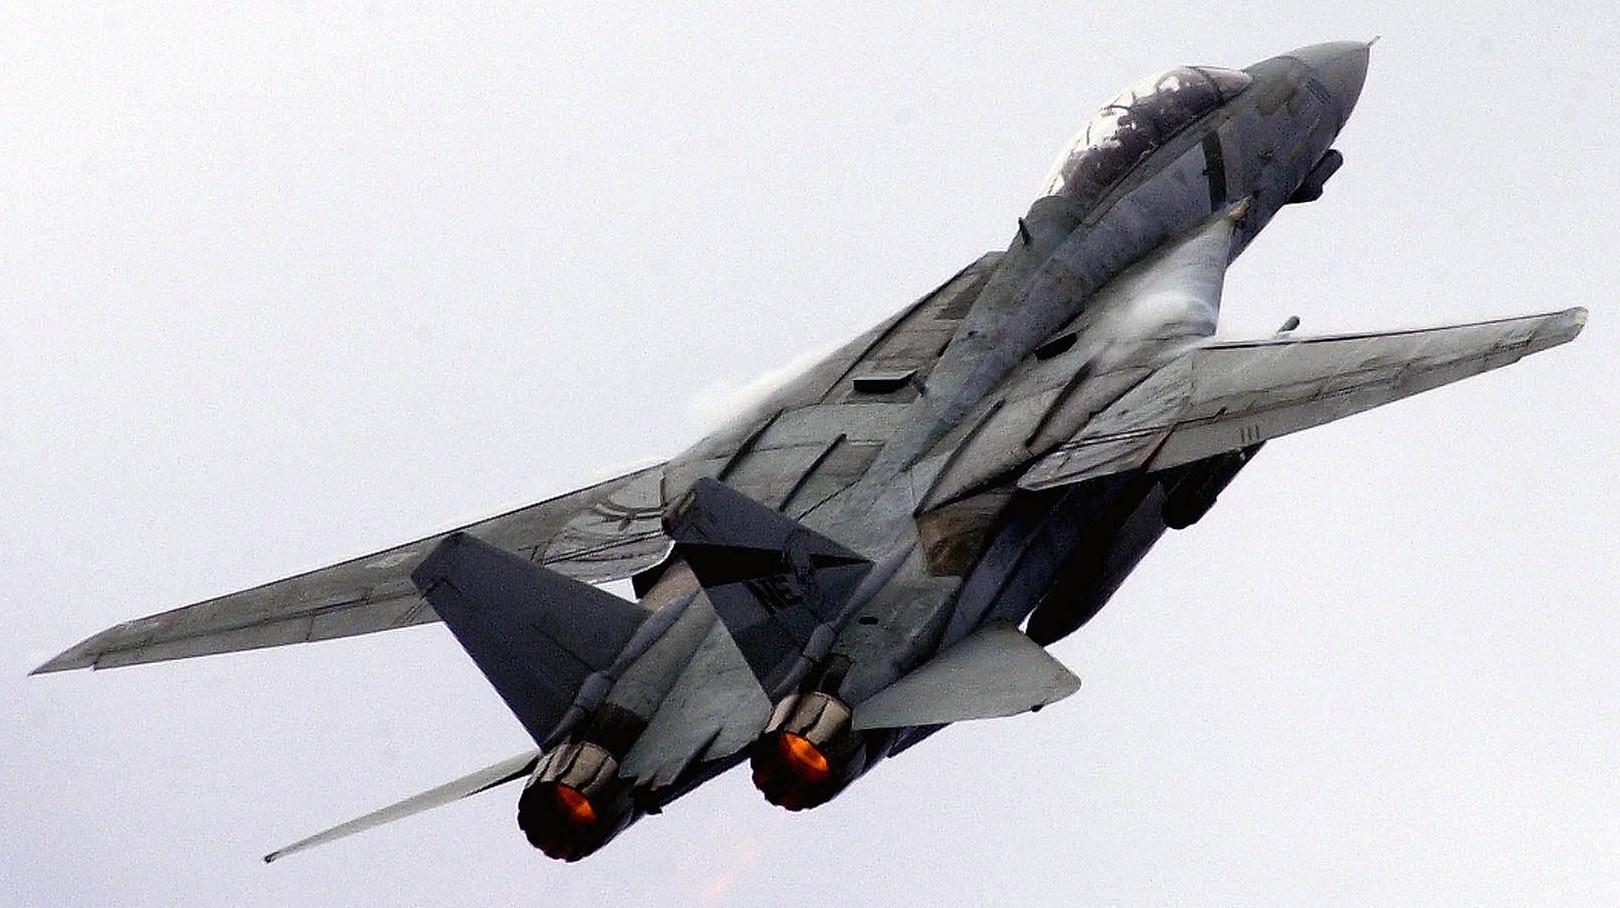 vf-2 bounty hunters fighter squadron fitron f-14d tomcat carrier air wing cvw-2 uss constellation cv-64 47